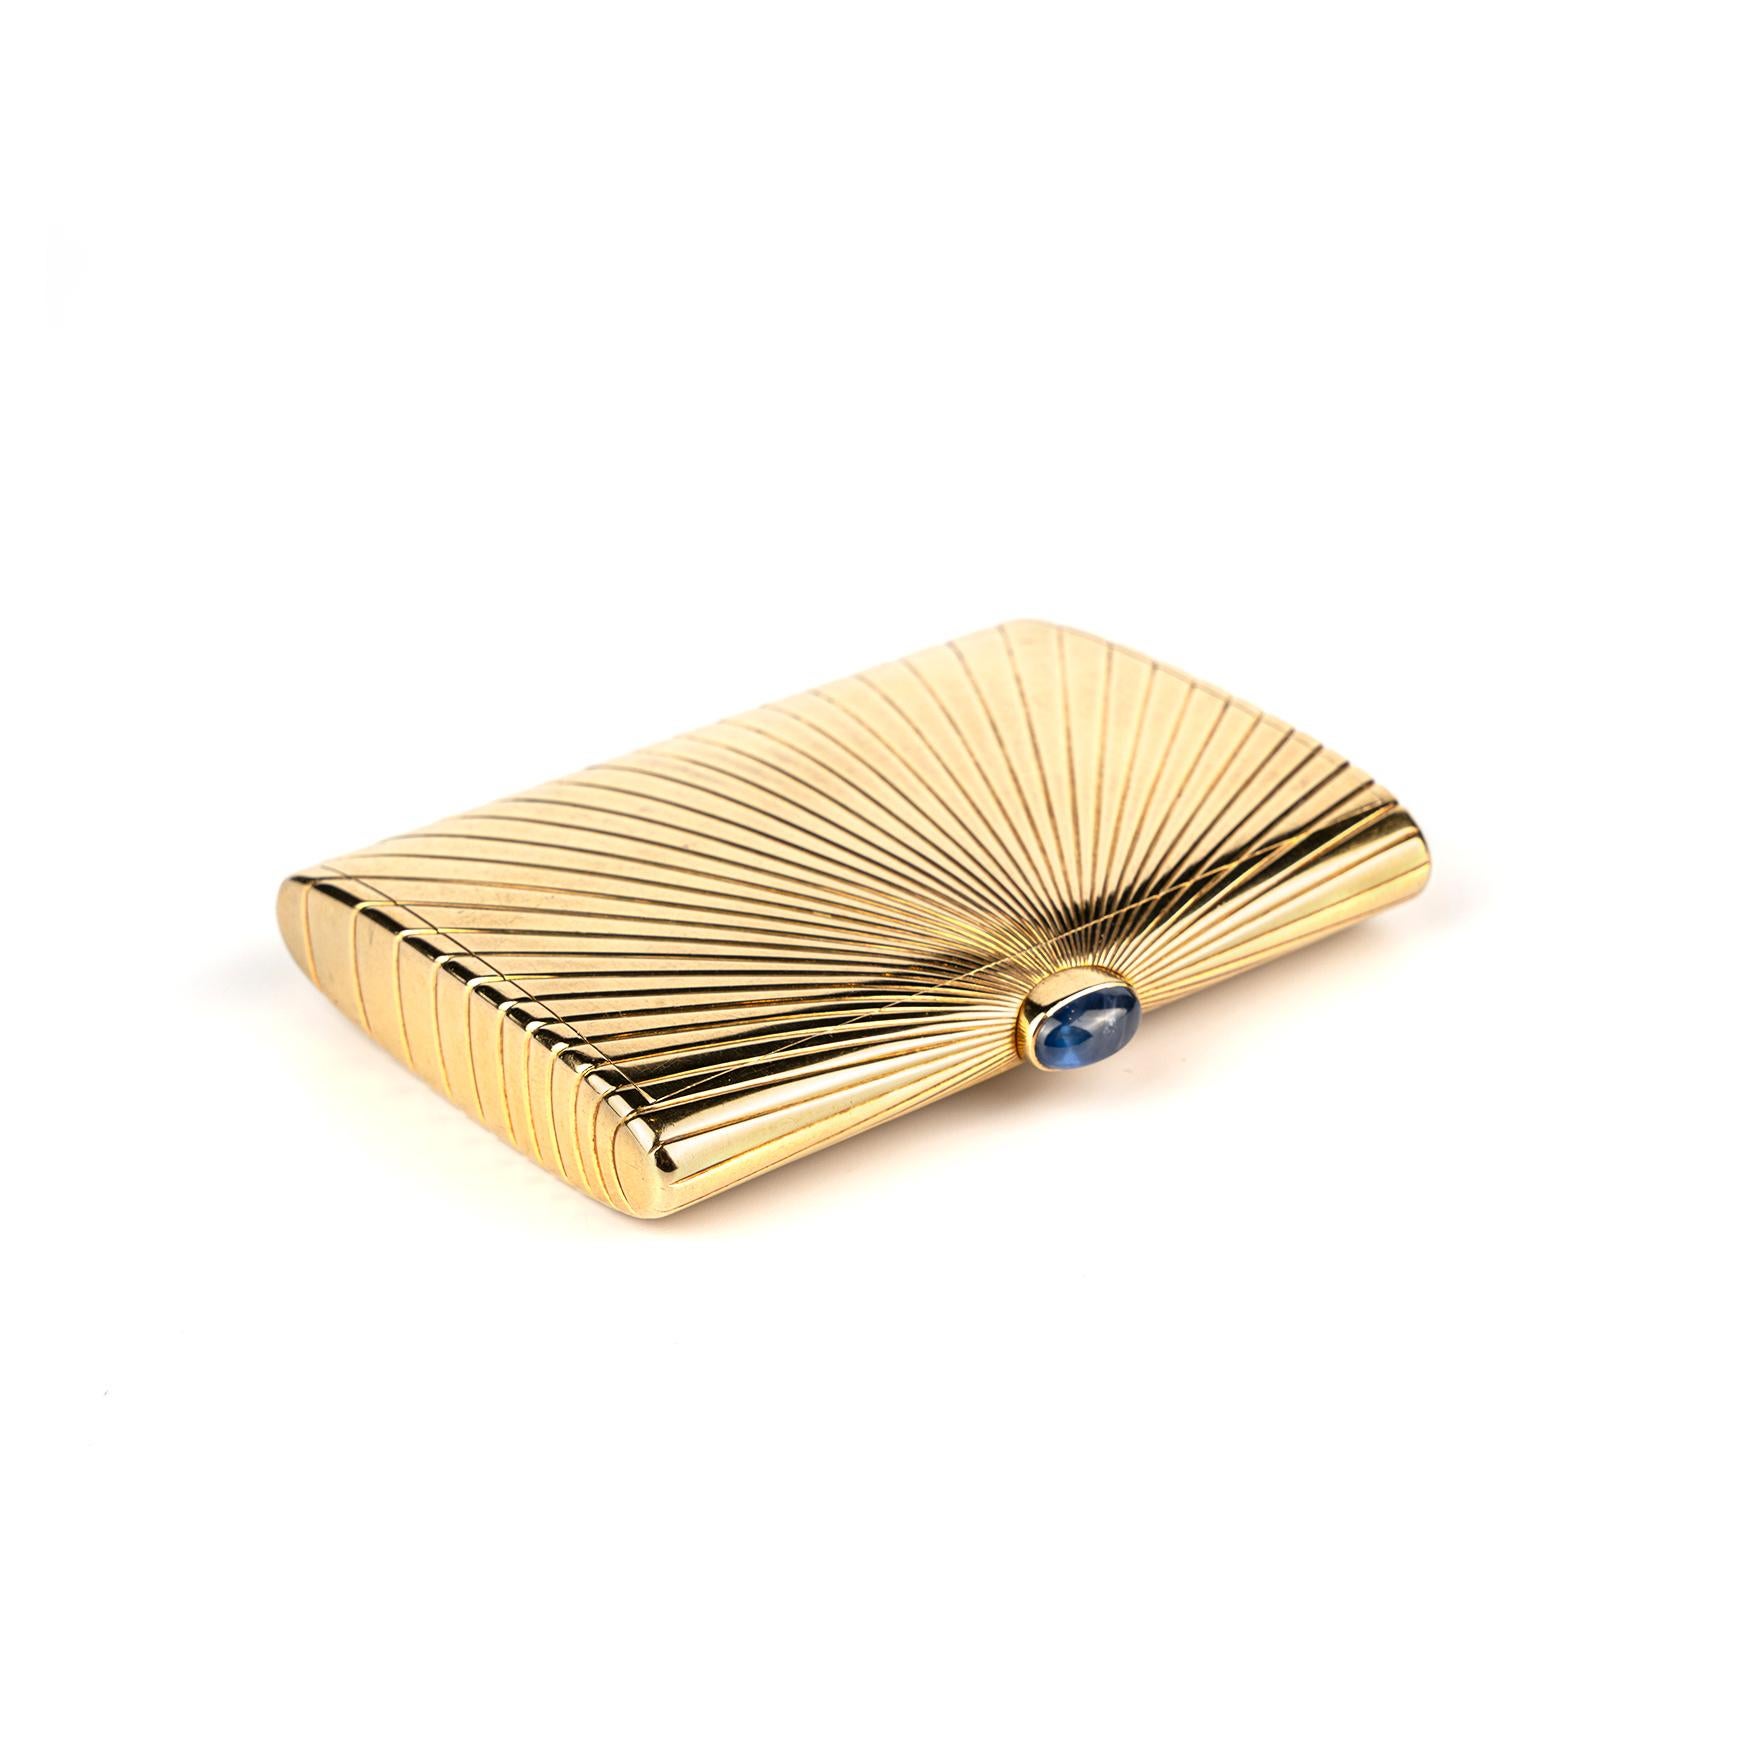 A sumptuous and collectible Cartier Paris golden compact in 18k gold with sapphire clasp, showcasing a sunburst pattern. Made in France, circa 1960.

